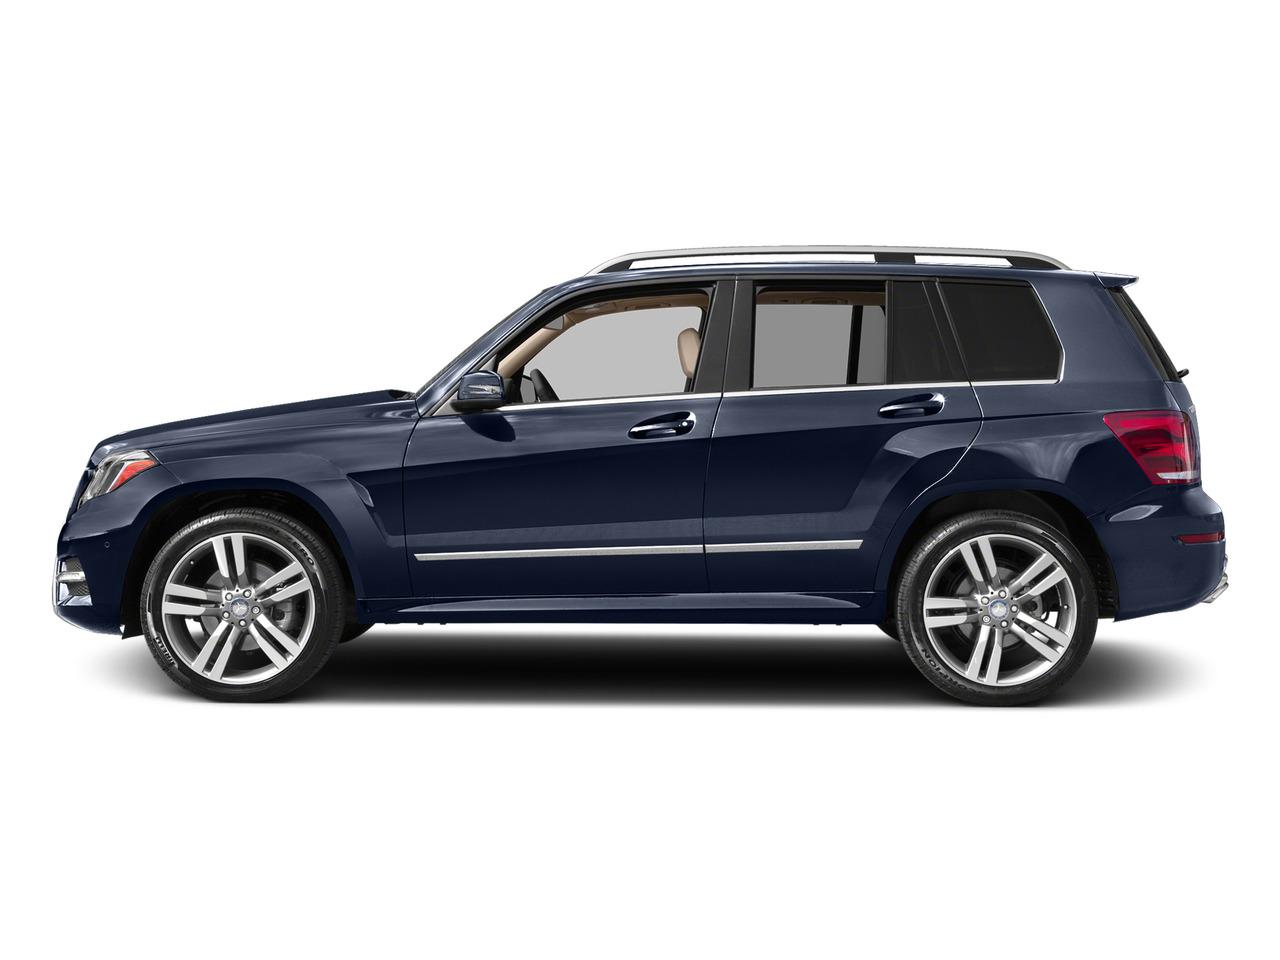 Used 2015 Mercedes-Benz GLK-Class For Sale in JERSEY VILLAGE, TX - Blue  WDCGG5HB5FG396112